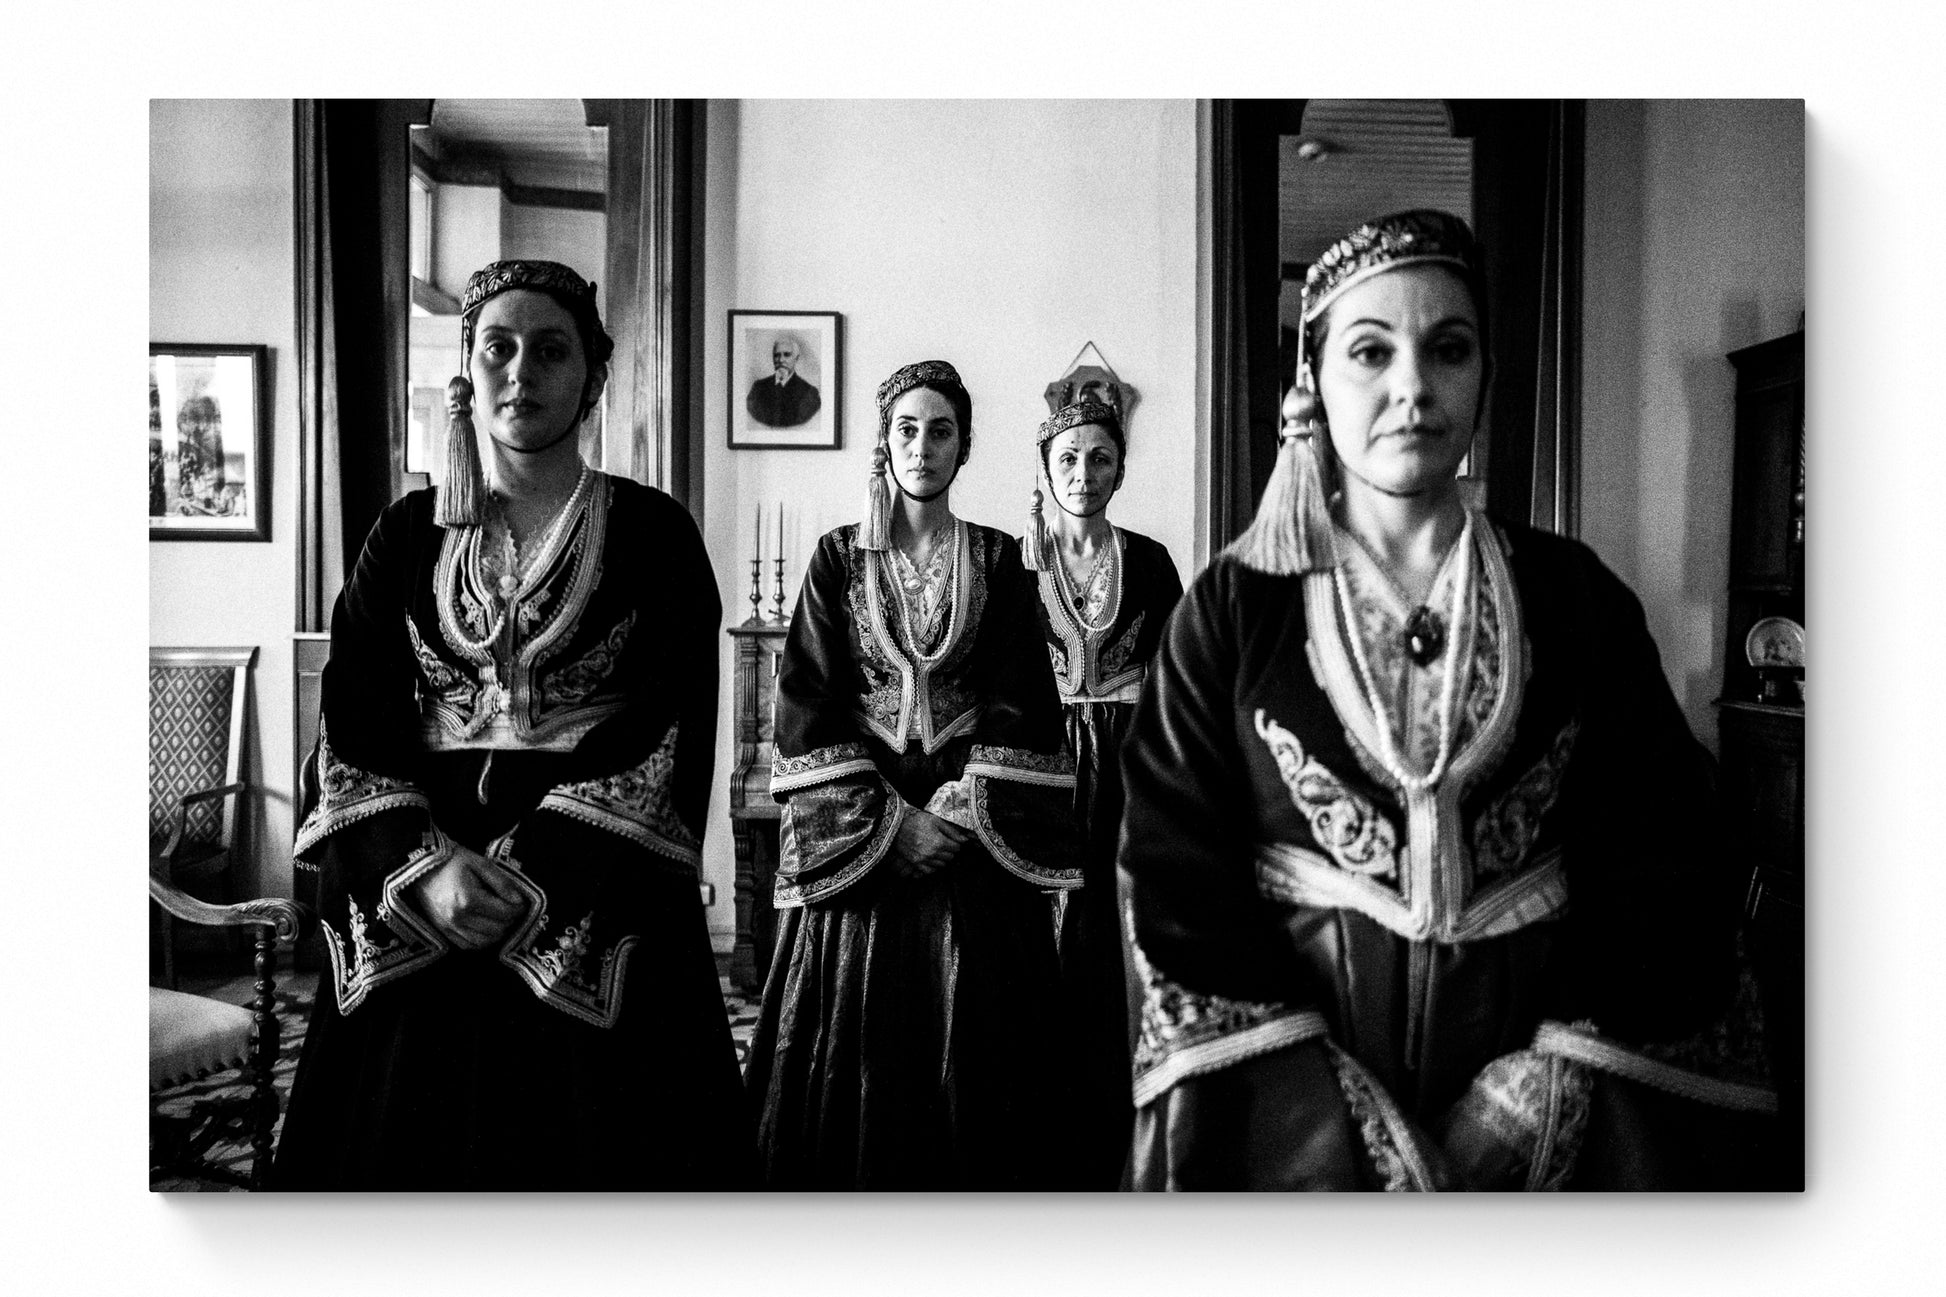 Black and White Photography Wall Art Greece | Costumes of Amalia in Tripolis Arcadia Peloponnese by George Tatakis - whole photo